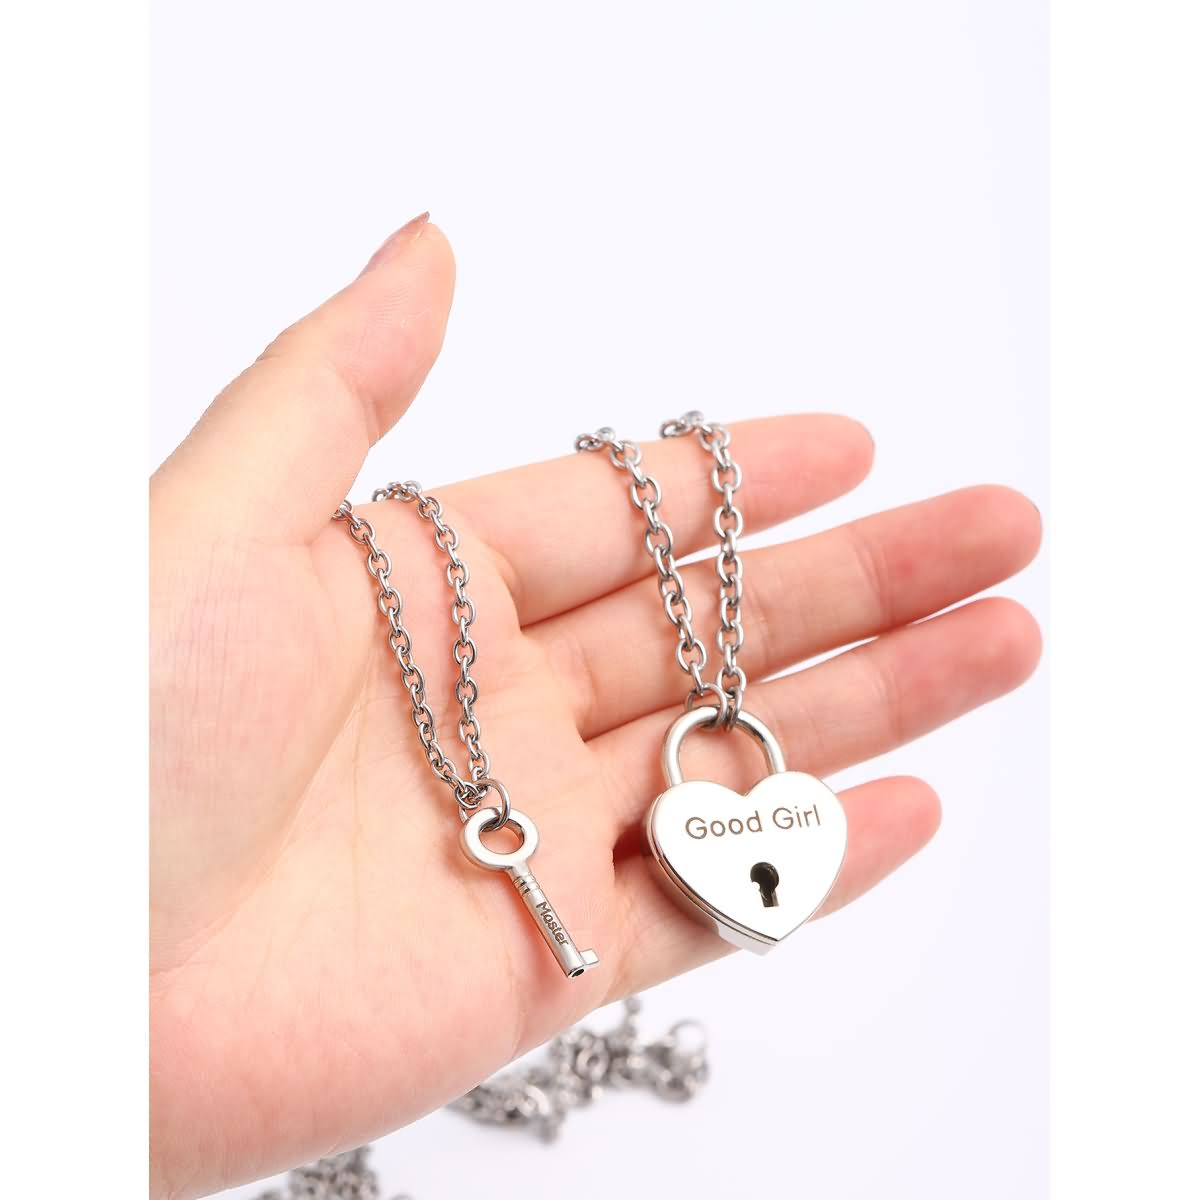 Heart Lock Key Pendant Necklaces, Meaning Anniversary Gift For Her For Him. His Lock and Her Key design symbolizing enduring love. Crafted with high-quality materials, perfect for any occasion. Wonder Skull Heart Lock Key Pendant Necklace, ideal anniversary gift for both him and her. Elevate your date night look with Wonder Skull sleepwear and lingerie.